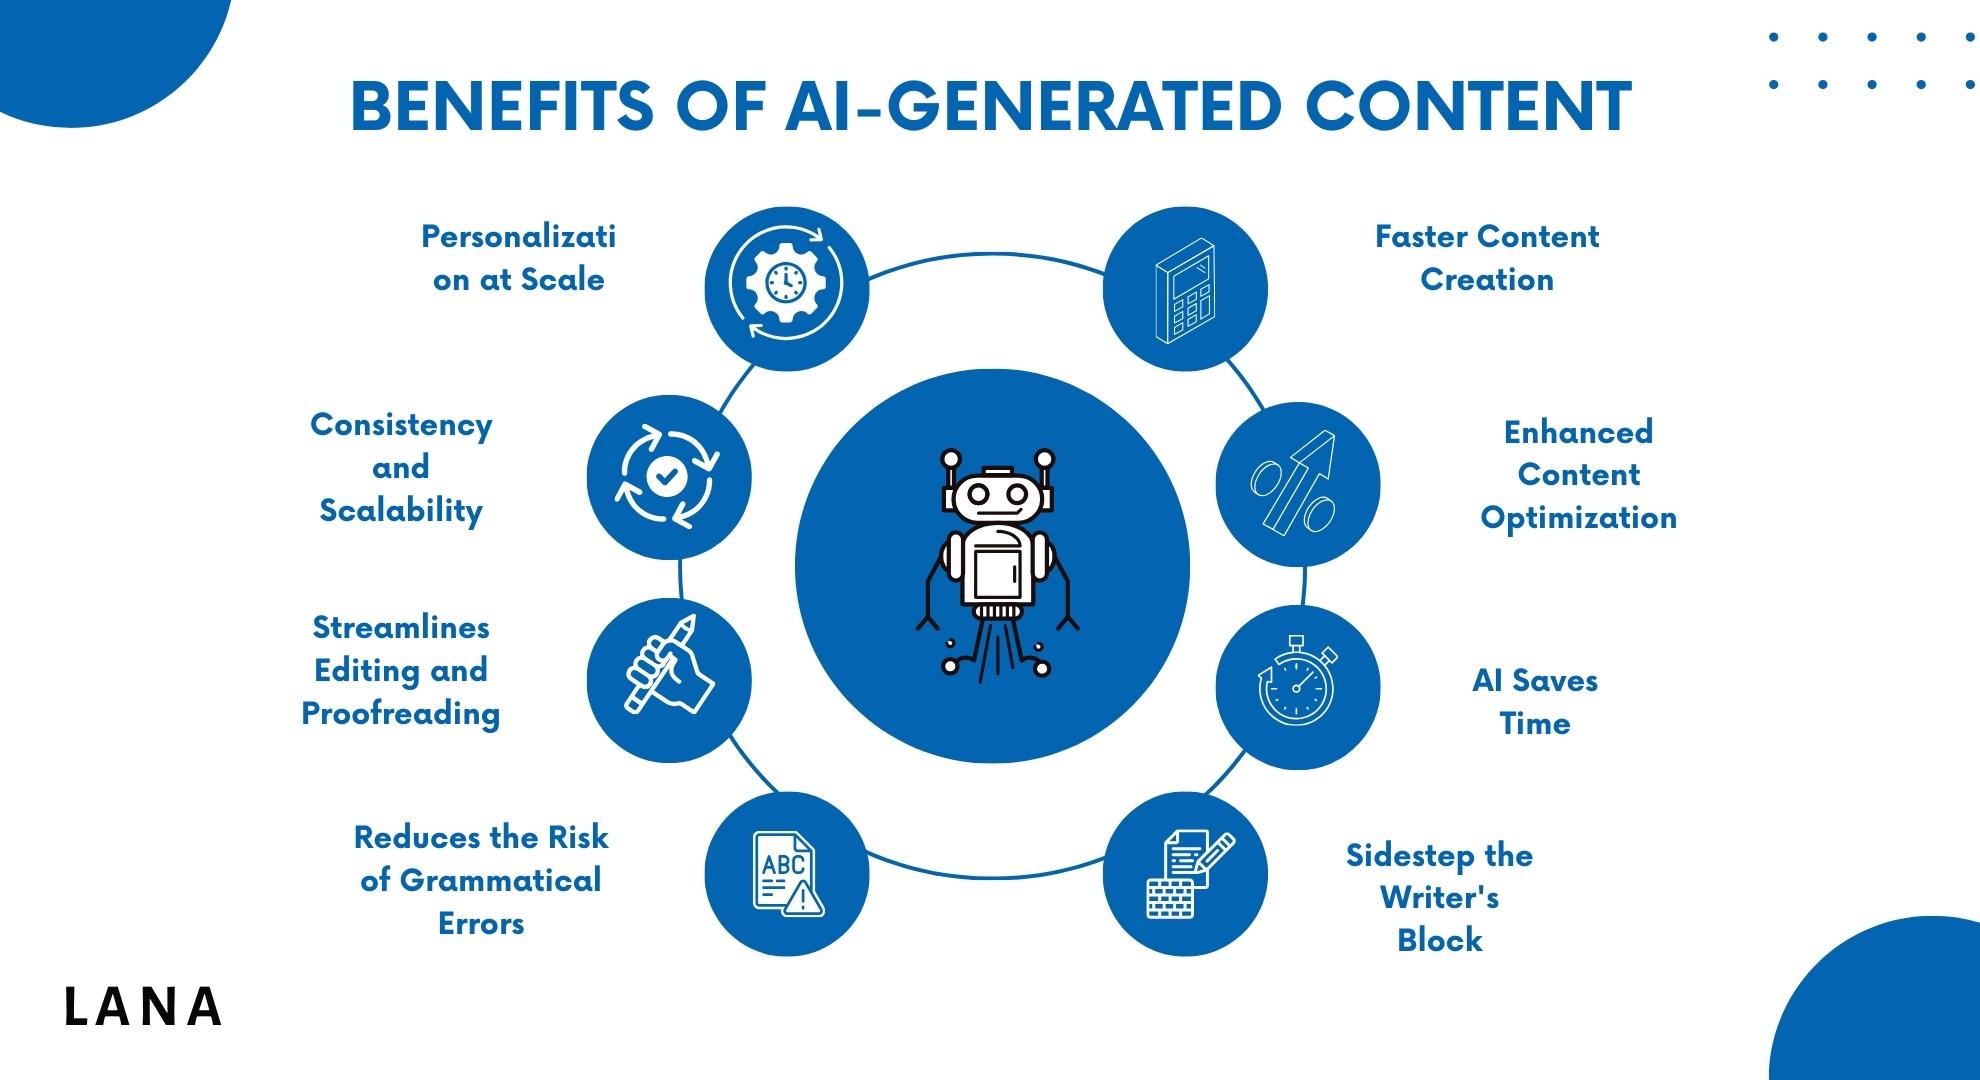 Benefits of AI-Generated Content